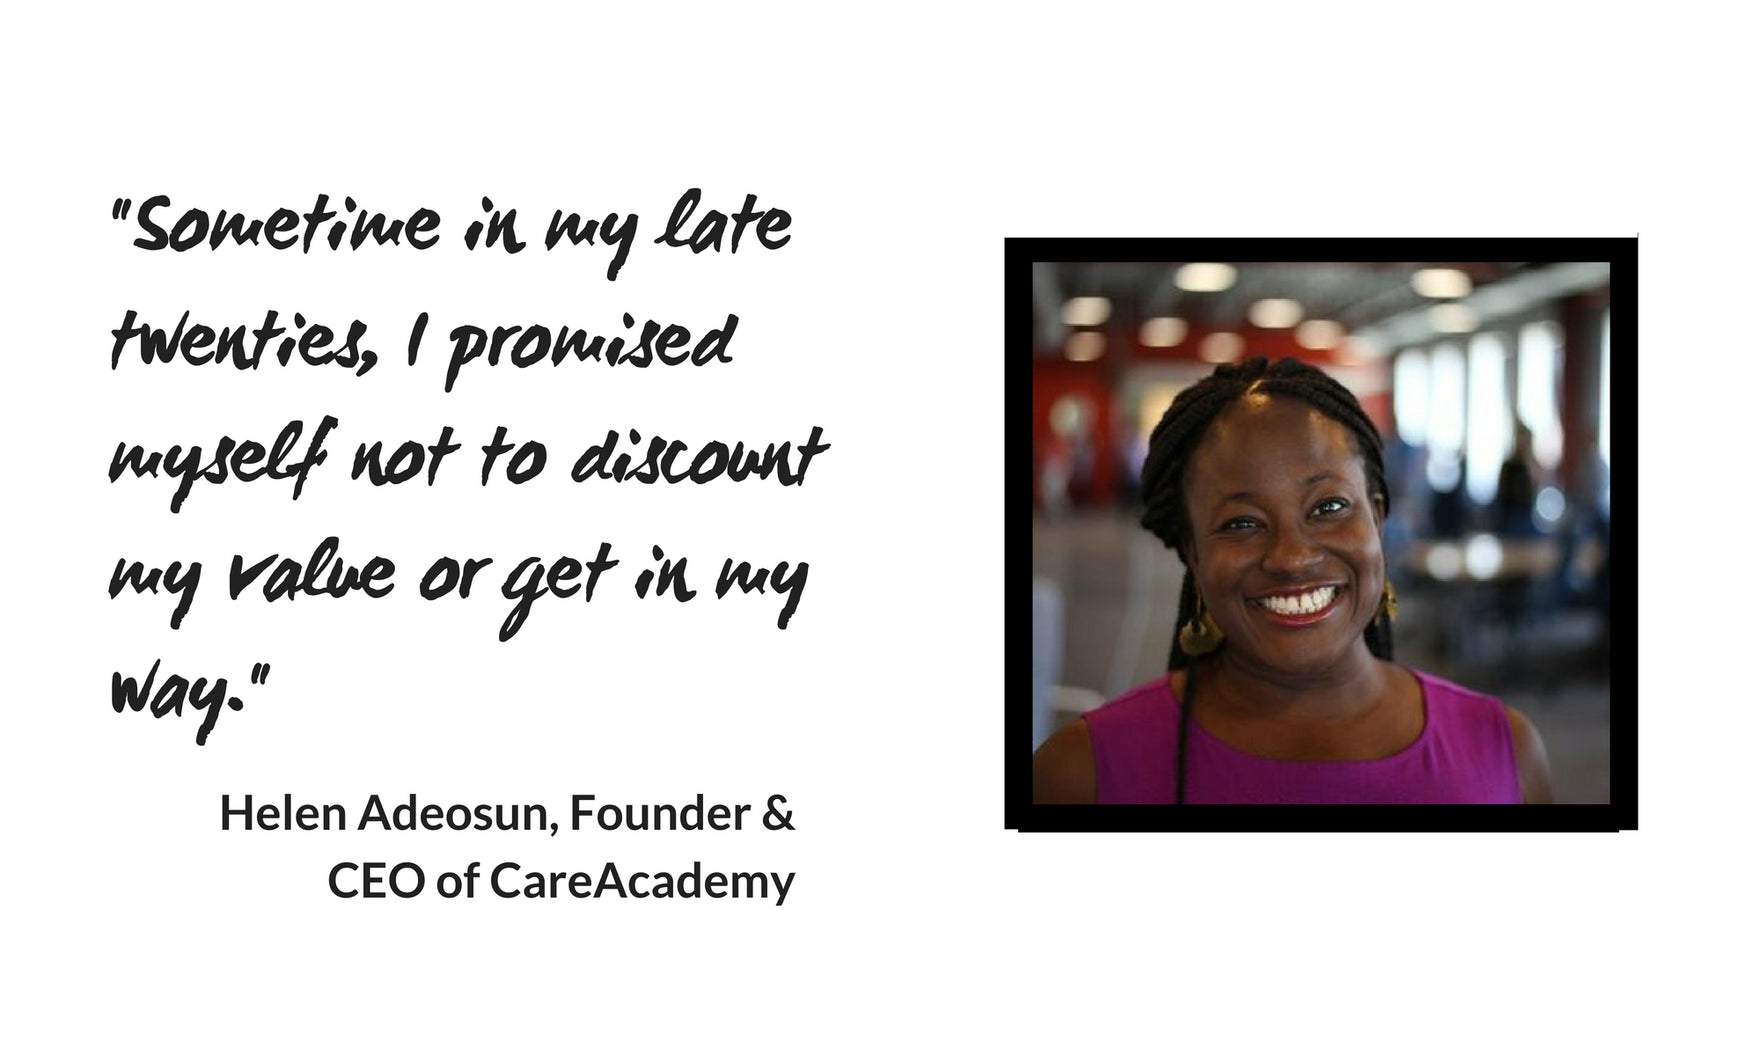 Helen Adeosun, CEO of CareAcademy, Answers “What’s In Your Planner?”